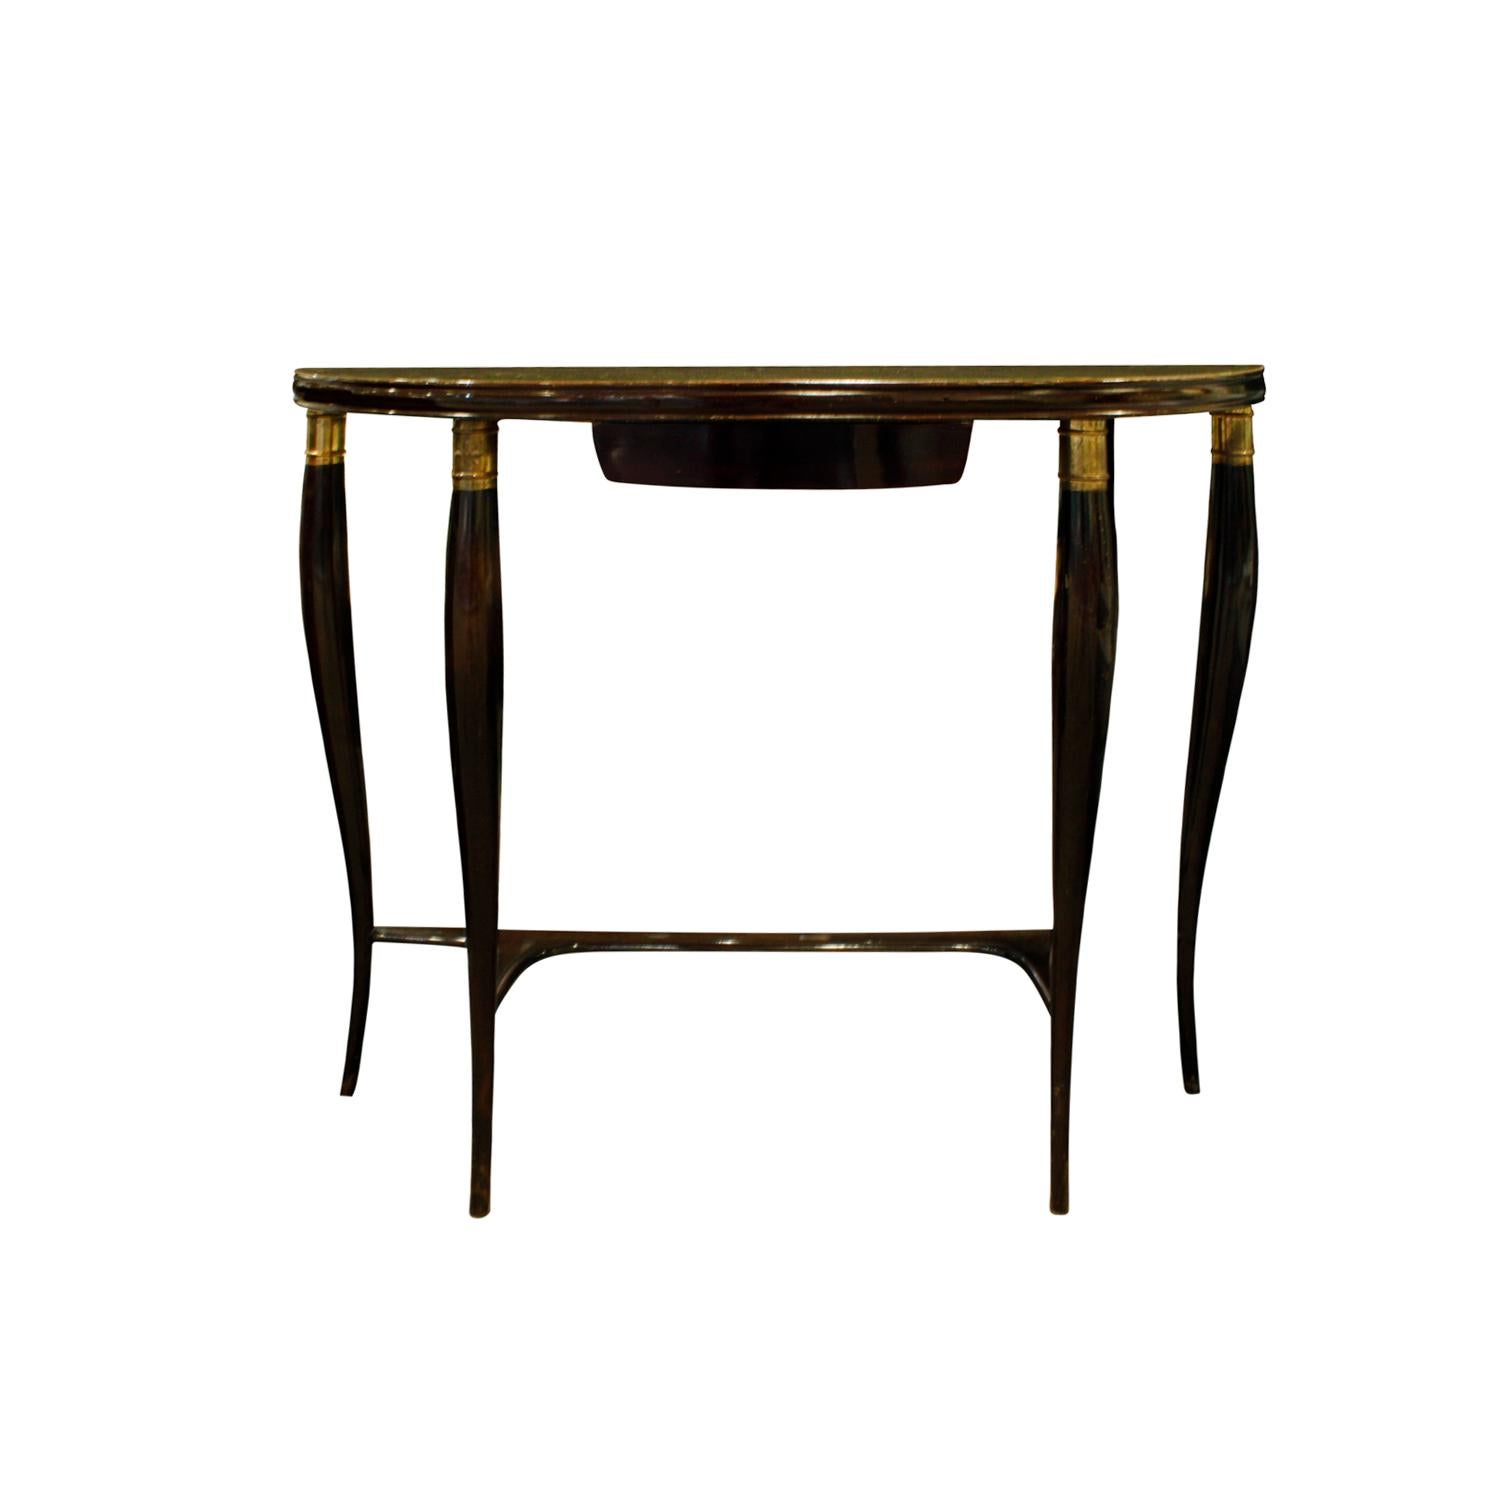 Elegant demilune shaped console table in mahogany with brass fittings and gold leaf glass top, Italy, 1950s. The gold leaf is applied to the underside of the glass. This table has a single drawer.